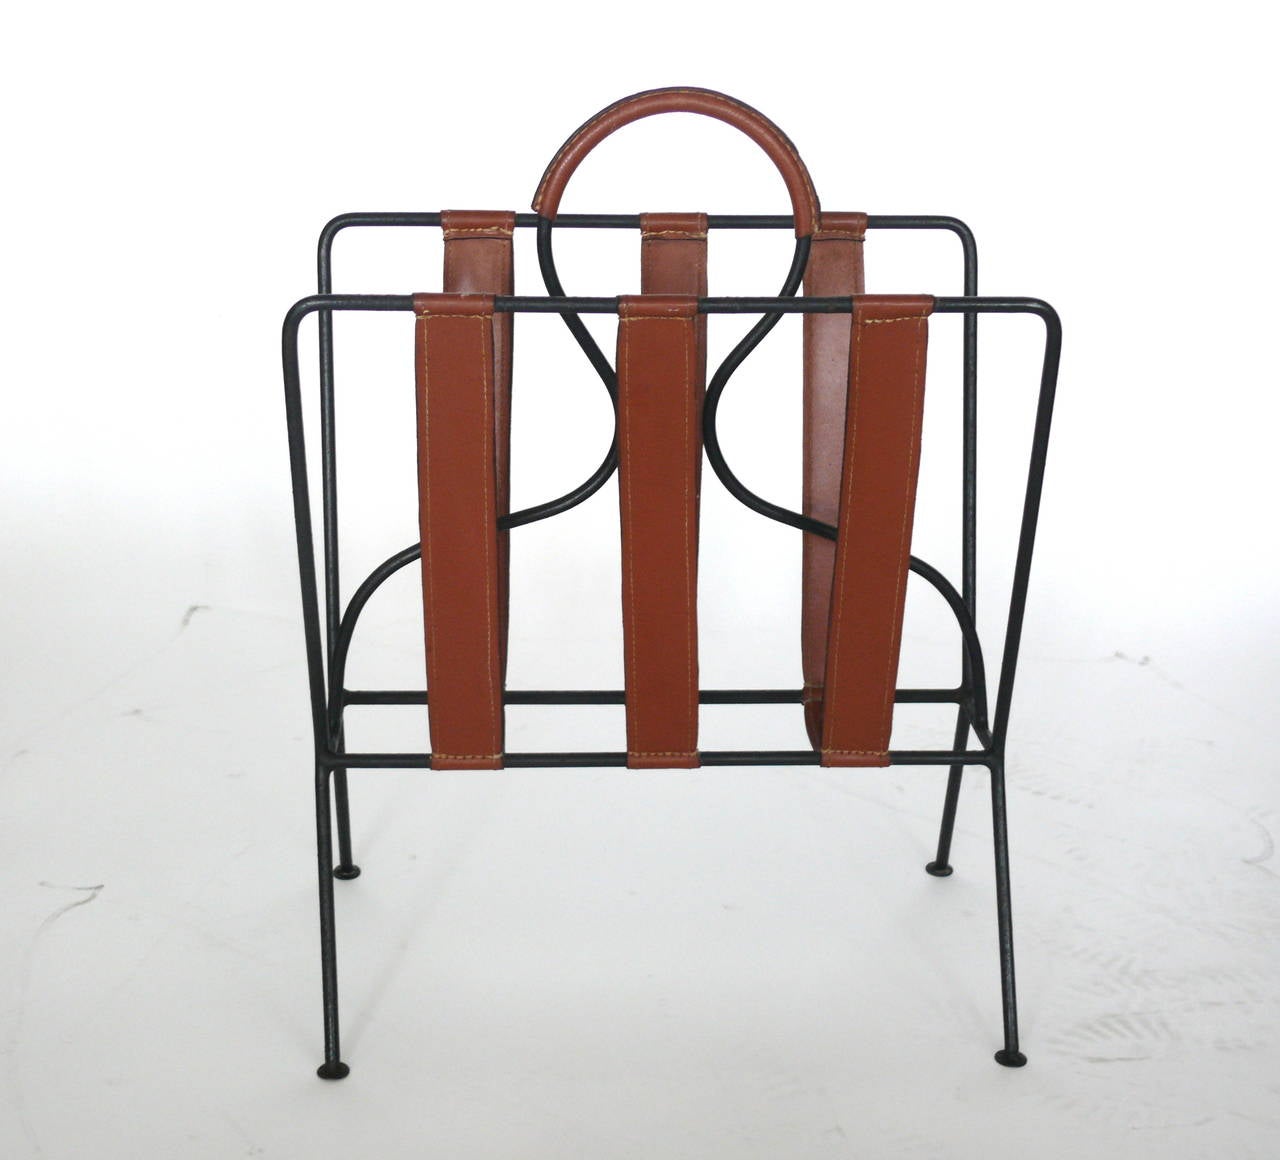 Handsome magazine rack by Jacques Adnet. Iron frame with saddle leather straps and leather wrapped handle. Signature contrast stitching throughout. Great patina to leather. Excellent vintage condition.